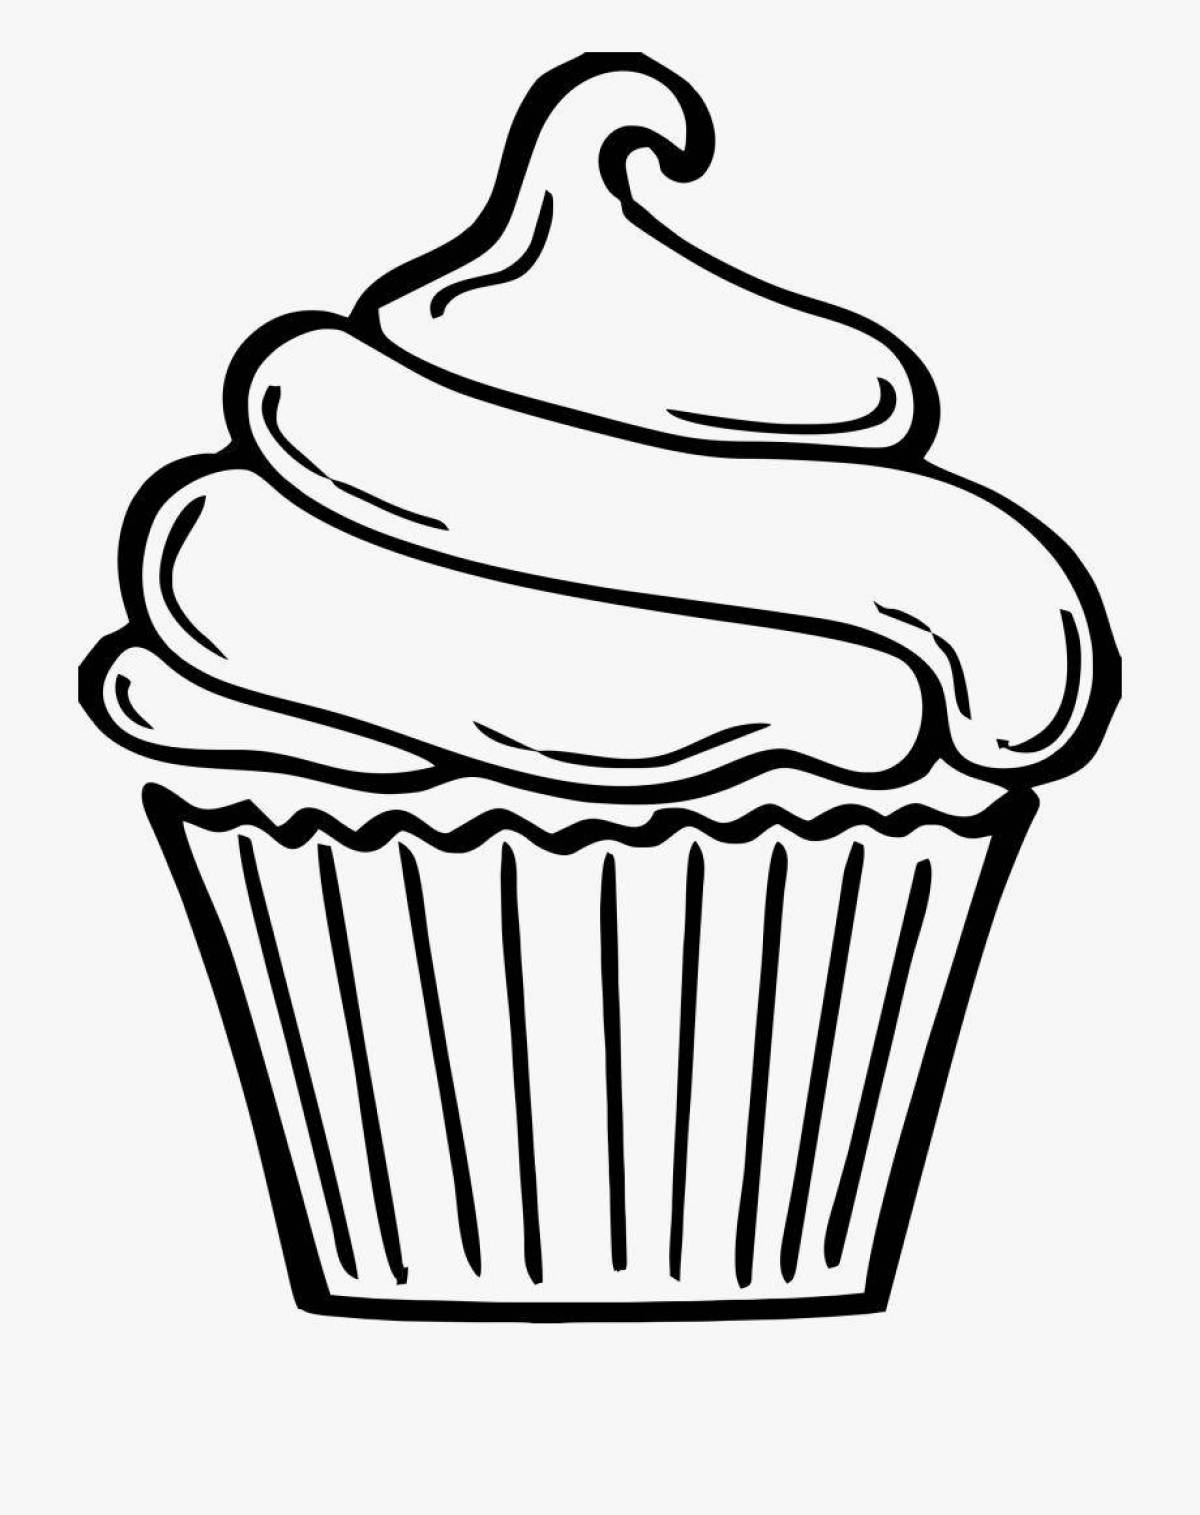 Charming bakery coloring page